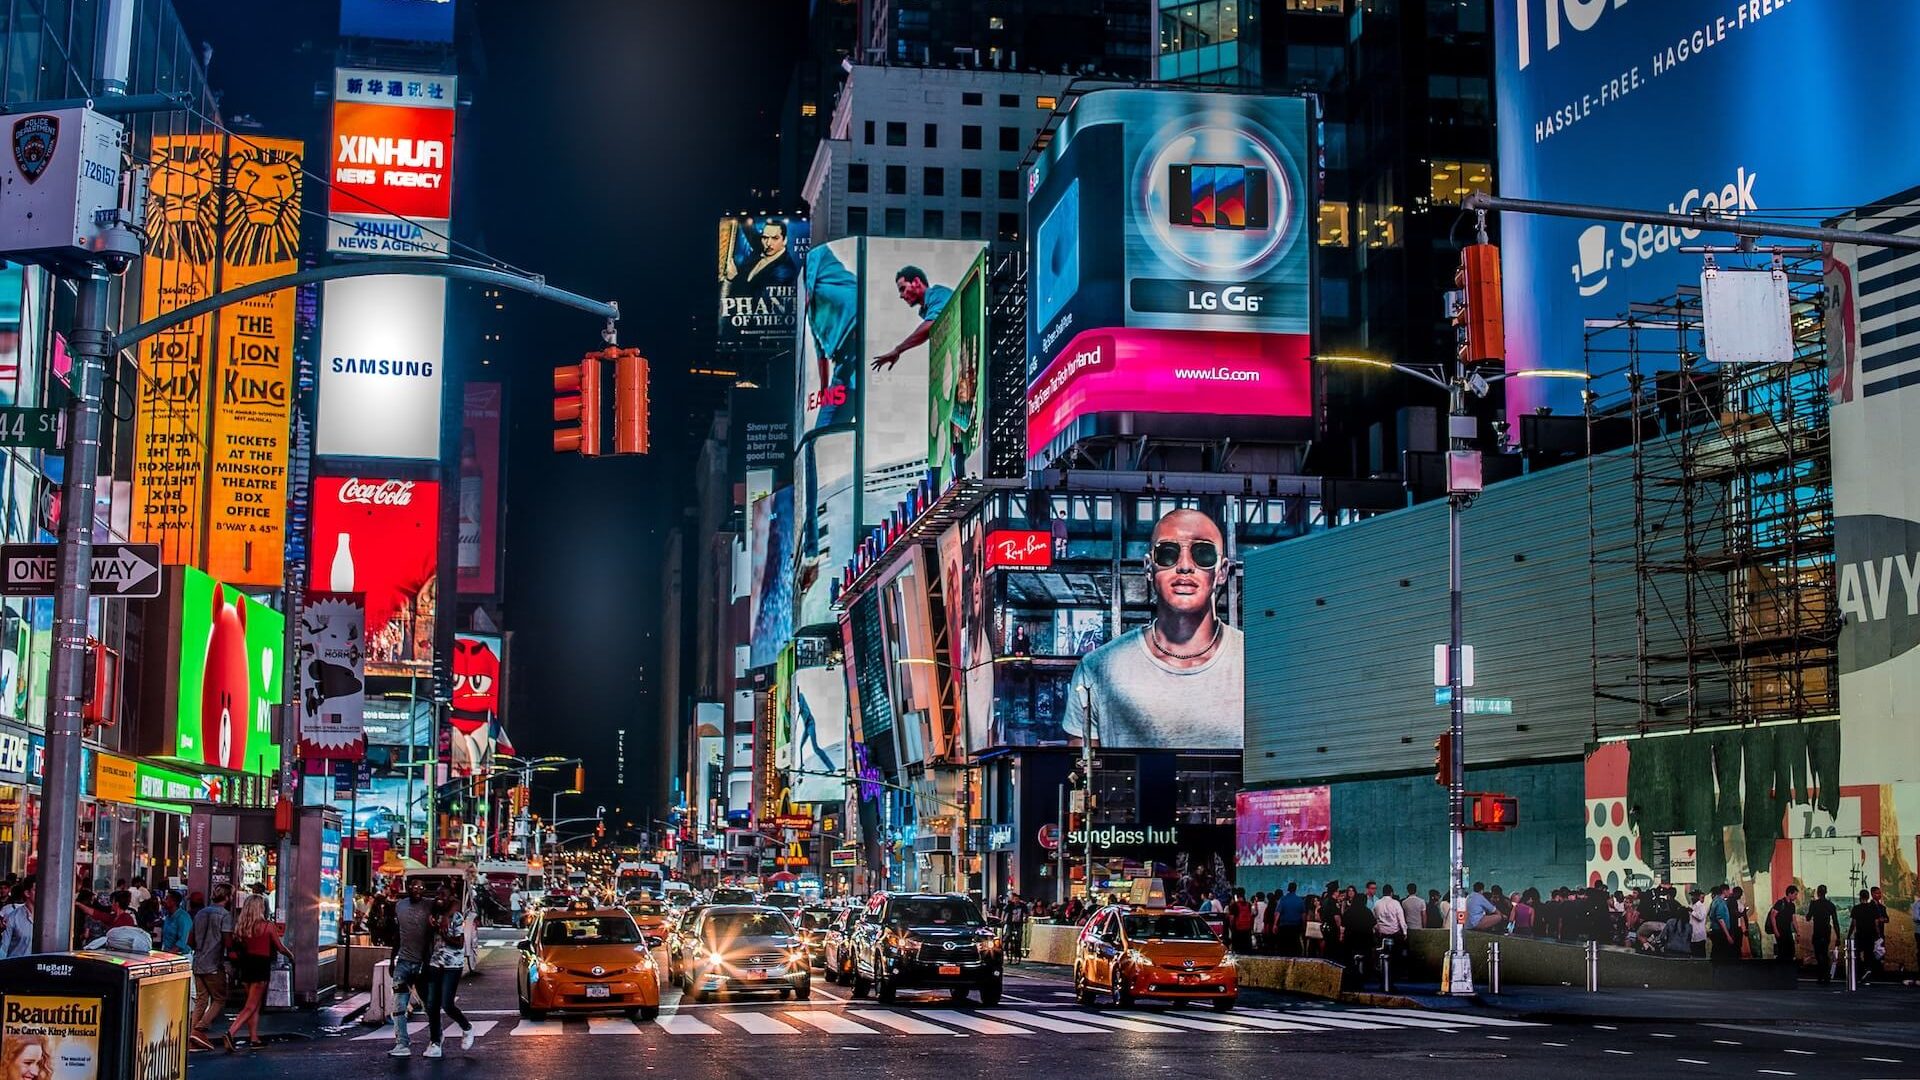 A bustling view of New York City's Times Square, known for its bright lights, billboards, and energetic atmosphere.